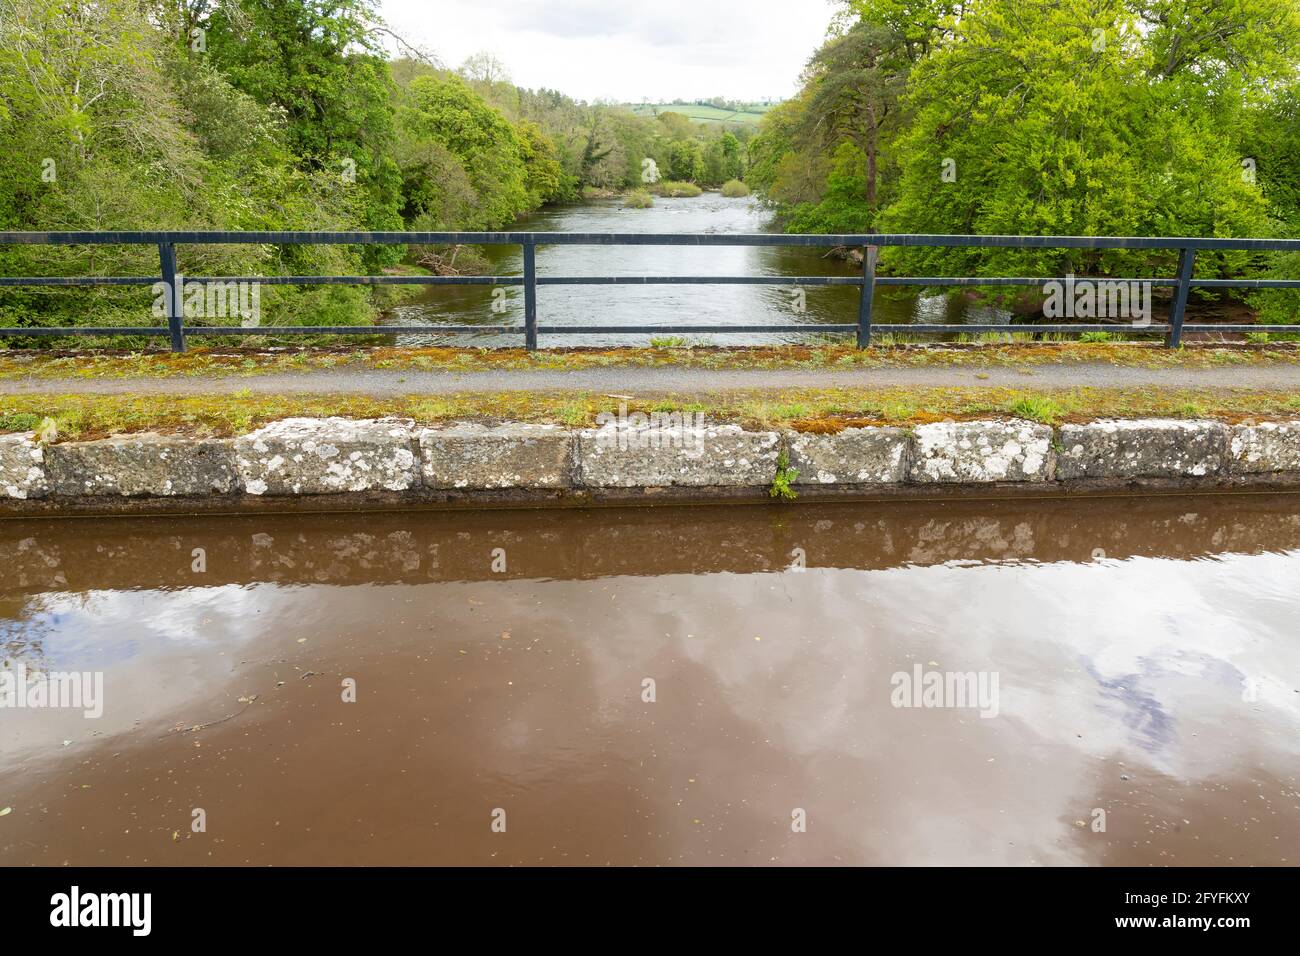 River Usk, seen from the Brynich aqueduct, near Brecon on the Monmouthshire and Brecon Canal, Powys, Wales, UK Stock Photo